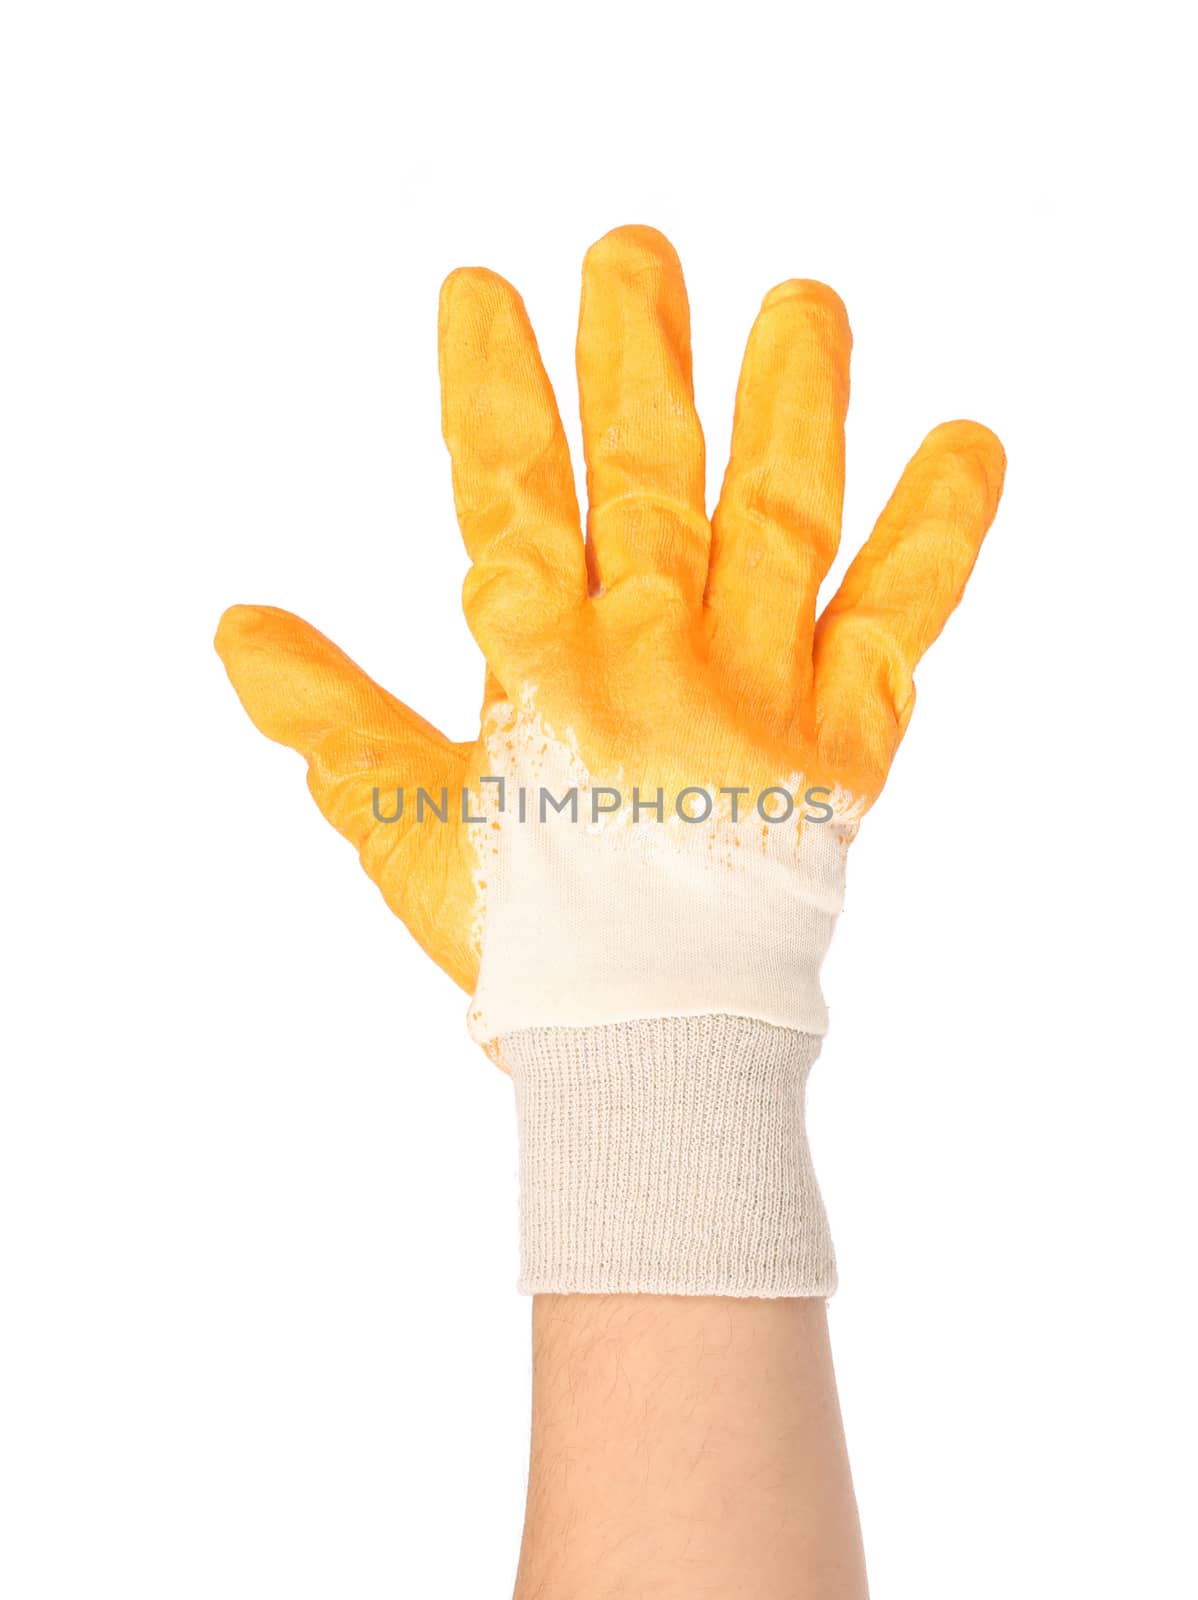 Hand in rubber glove shows five. Isolated on a white background.